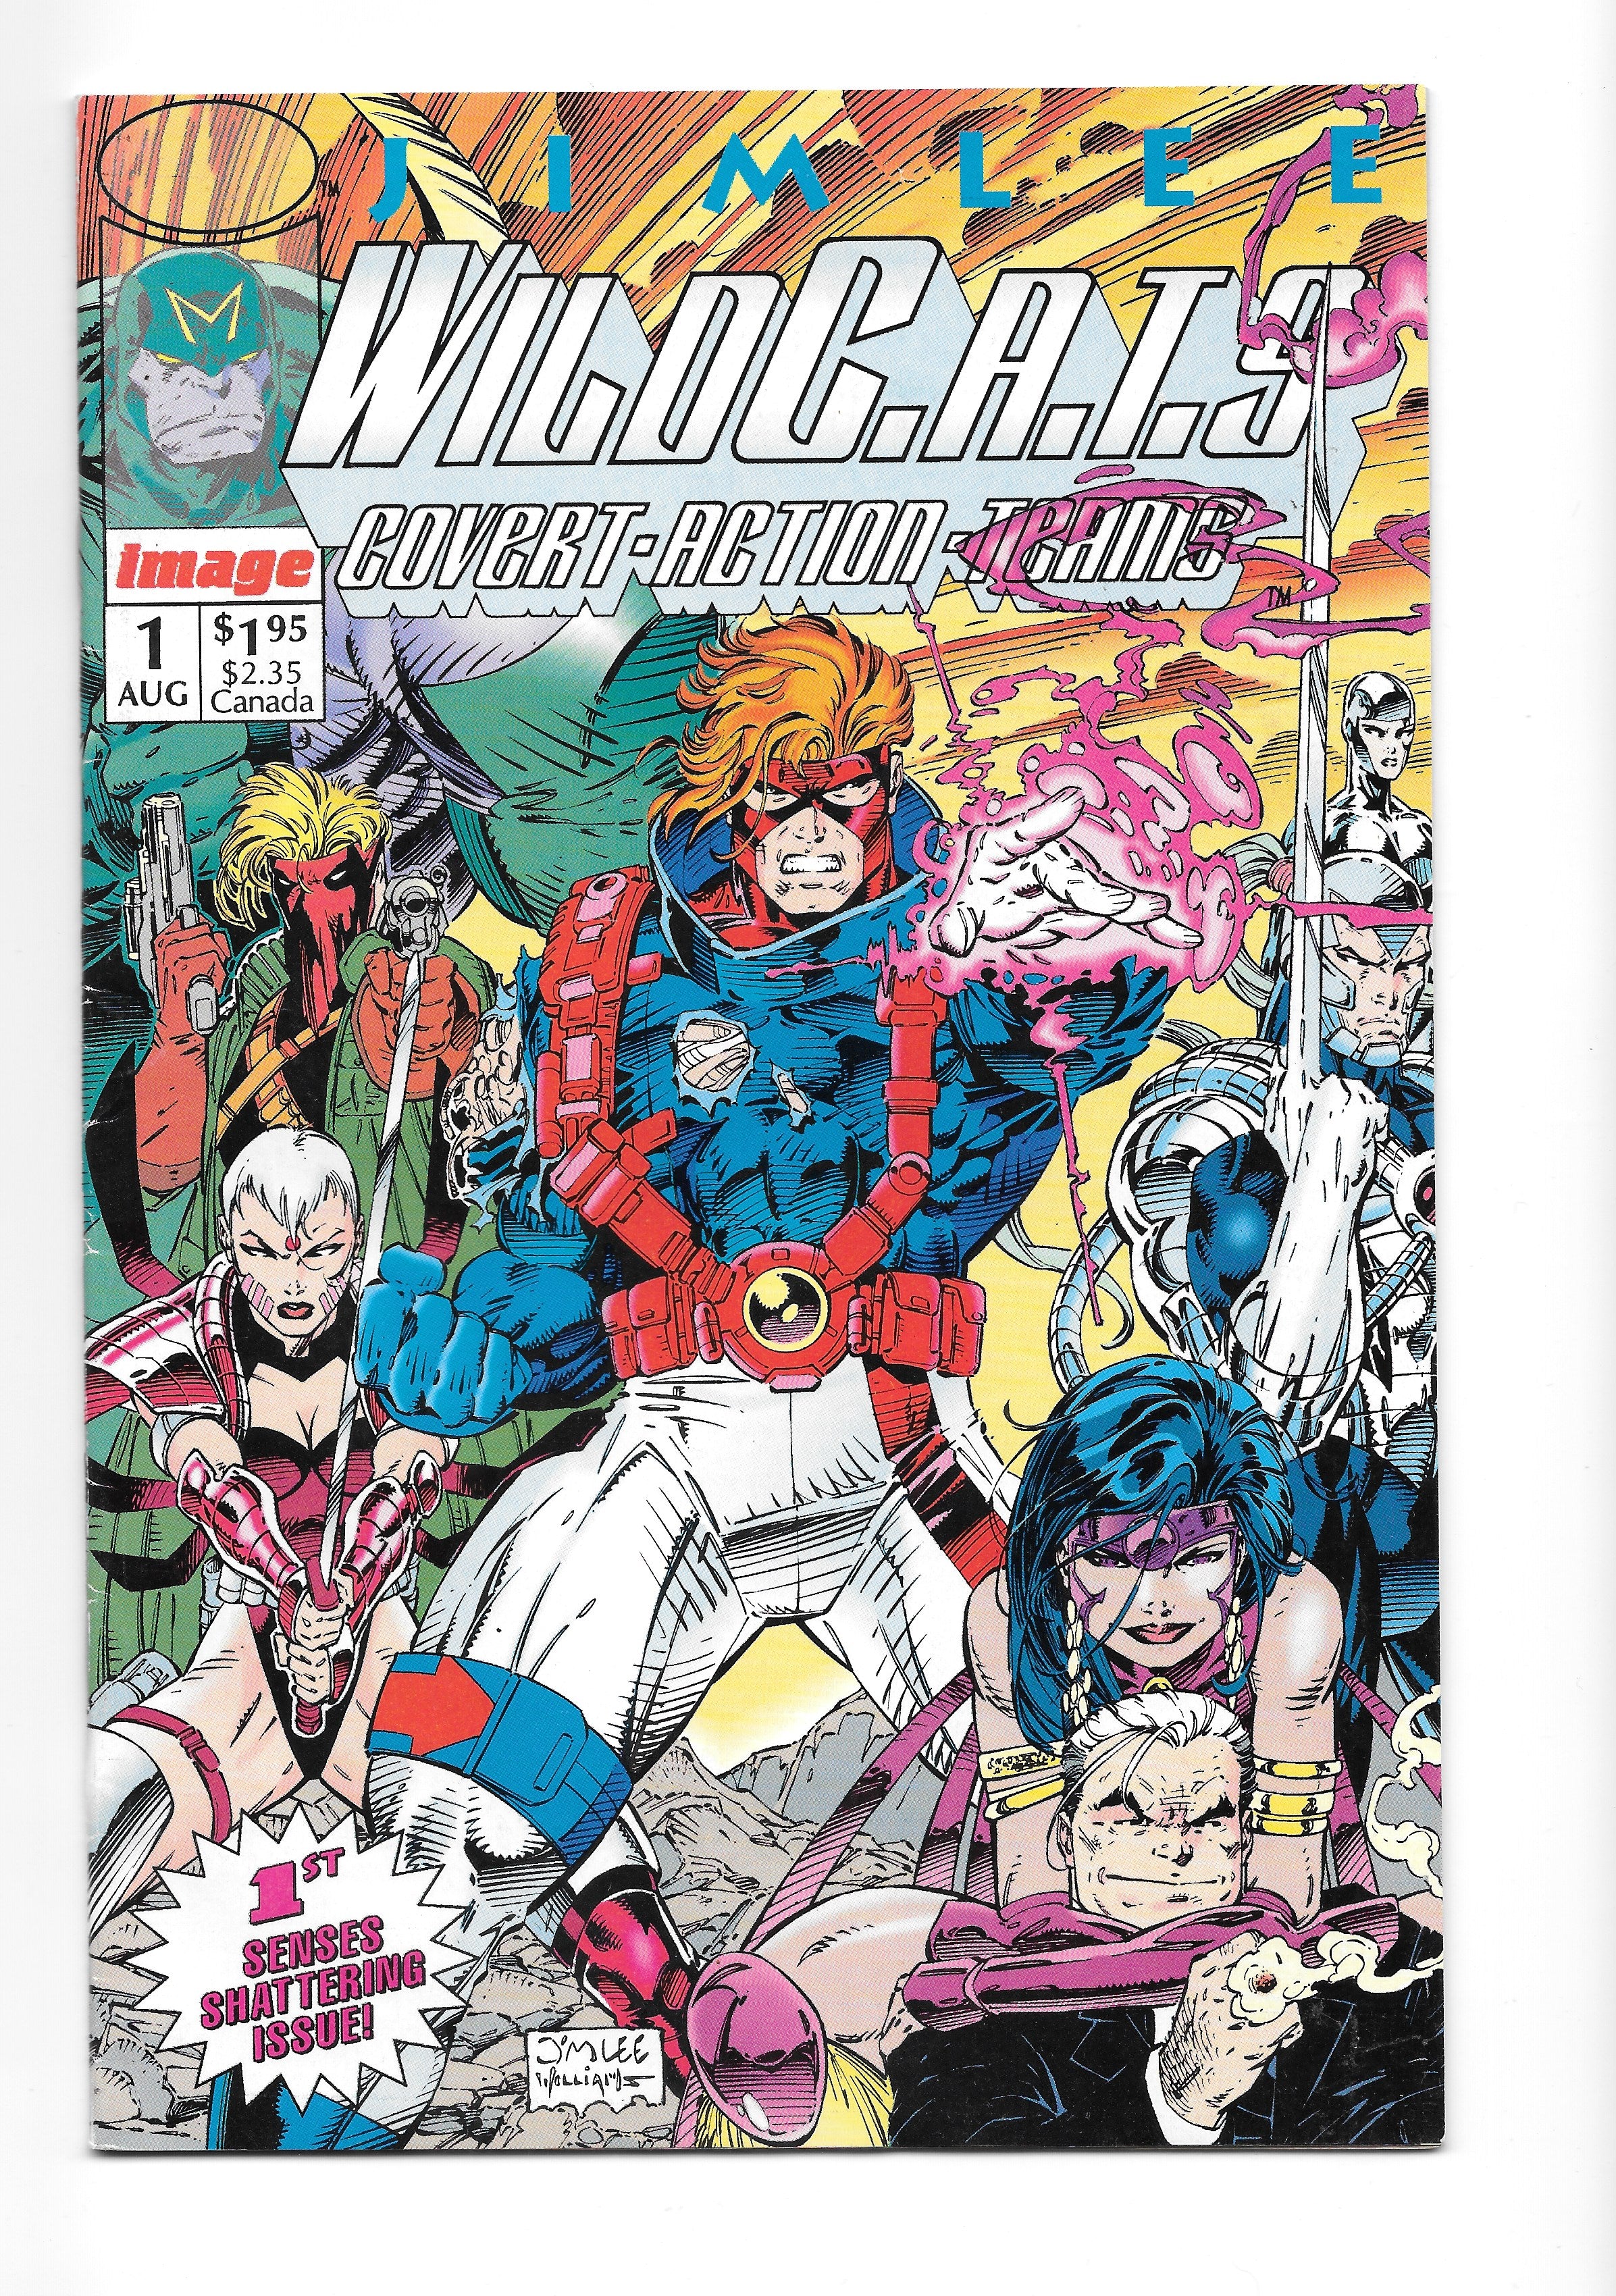 Photo of Wildc.A.T.S, Vol. 1 (1992)  Iss 1A   Comic sold by Stronghold Collectibles